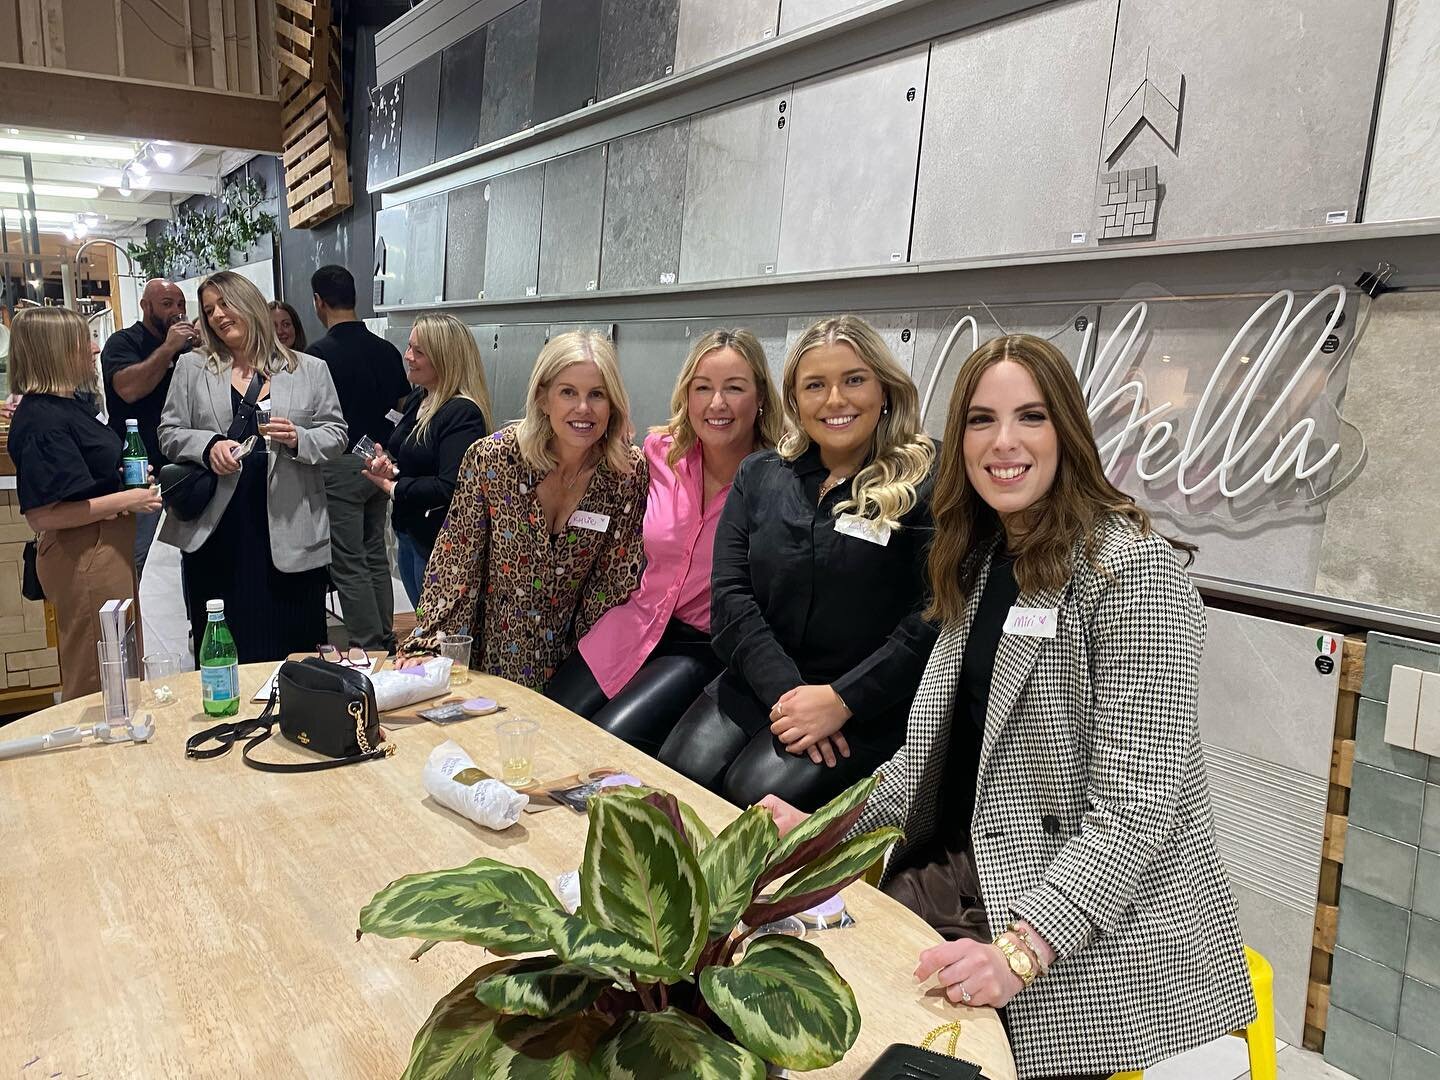 What an honour!

To share the space with so many talented women who are looking grow and expand within the design industry. 

The talented Kylie from @interiors.insider who is a design mentor interviewed myself and @flawlessinteriorsmelbourne as well